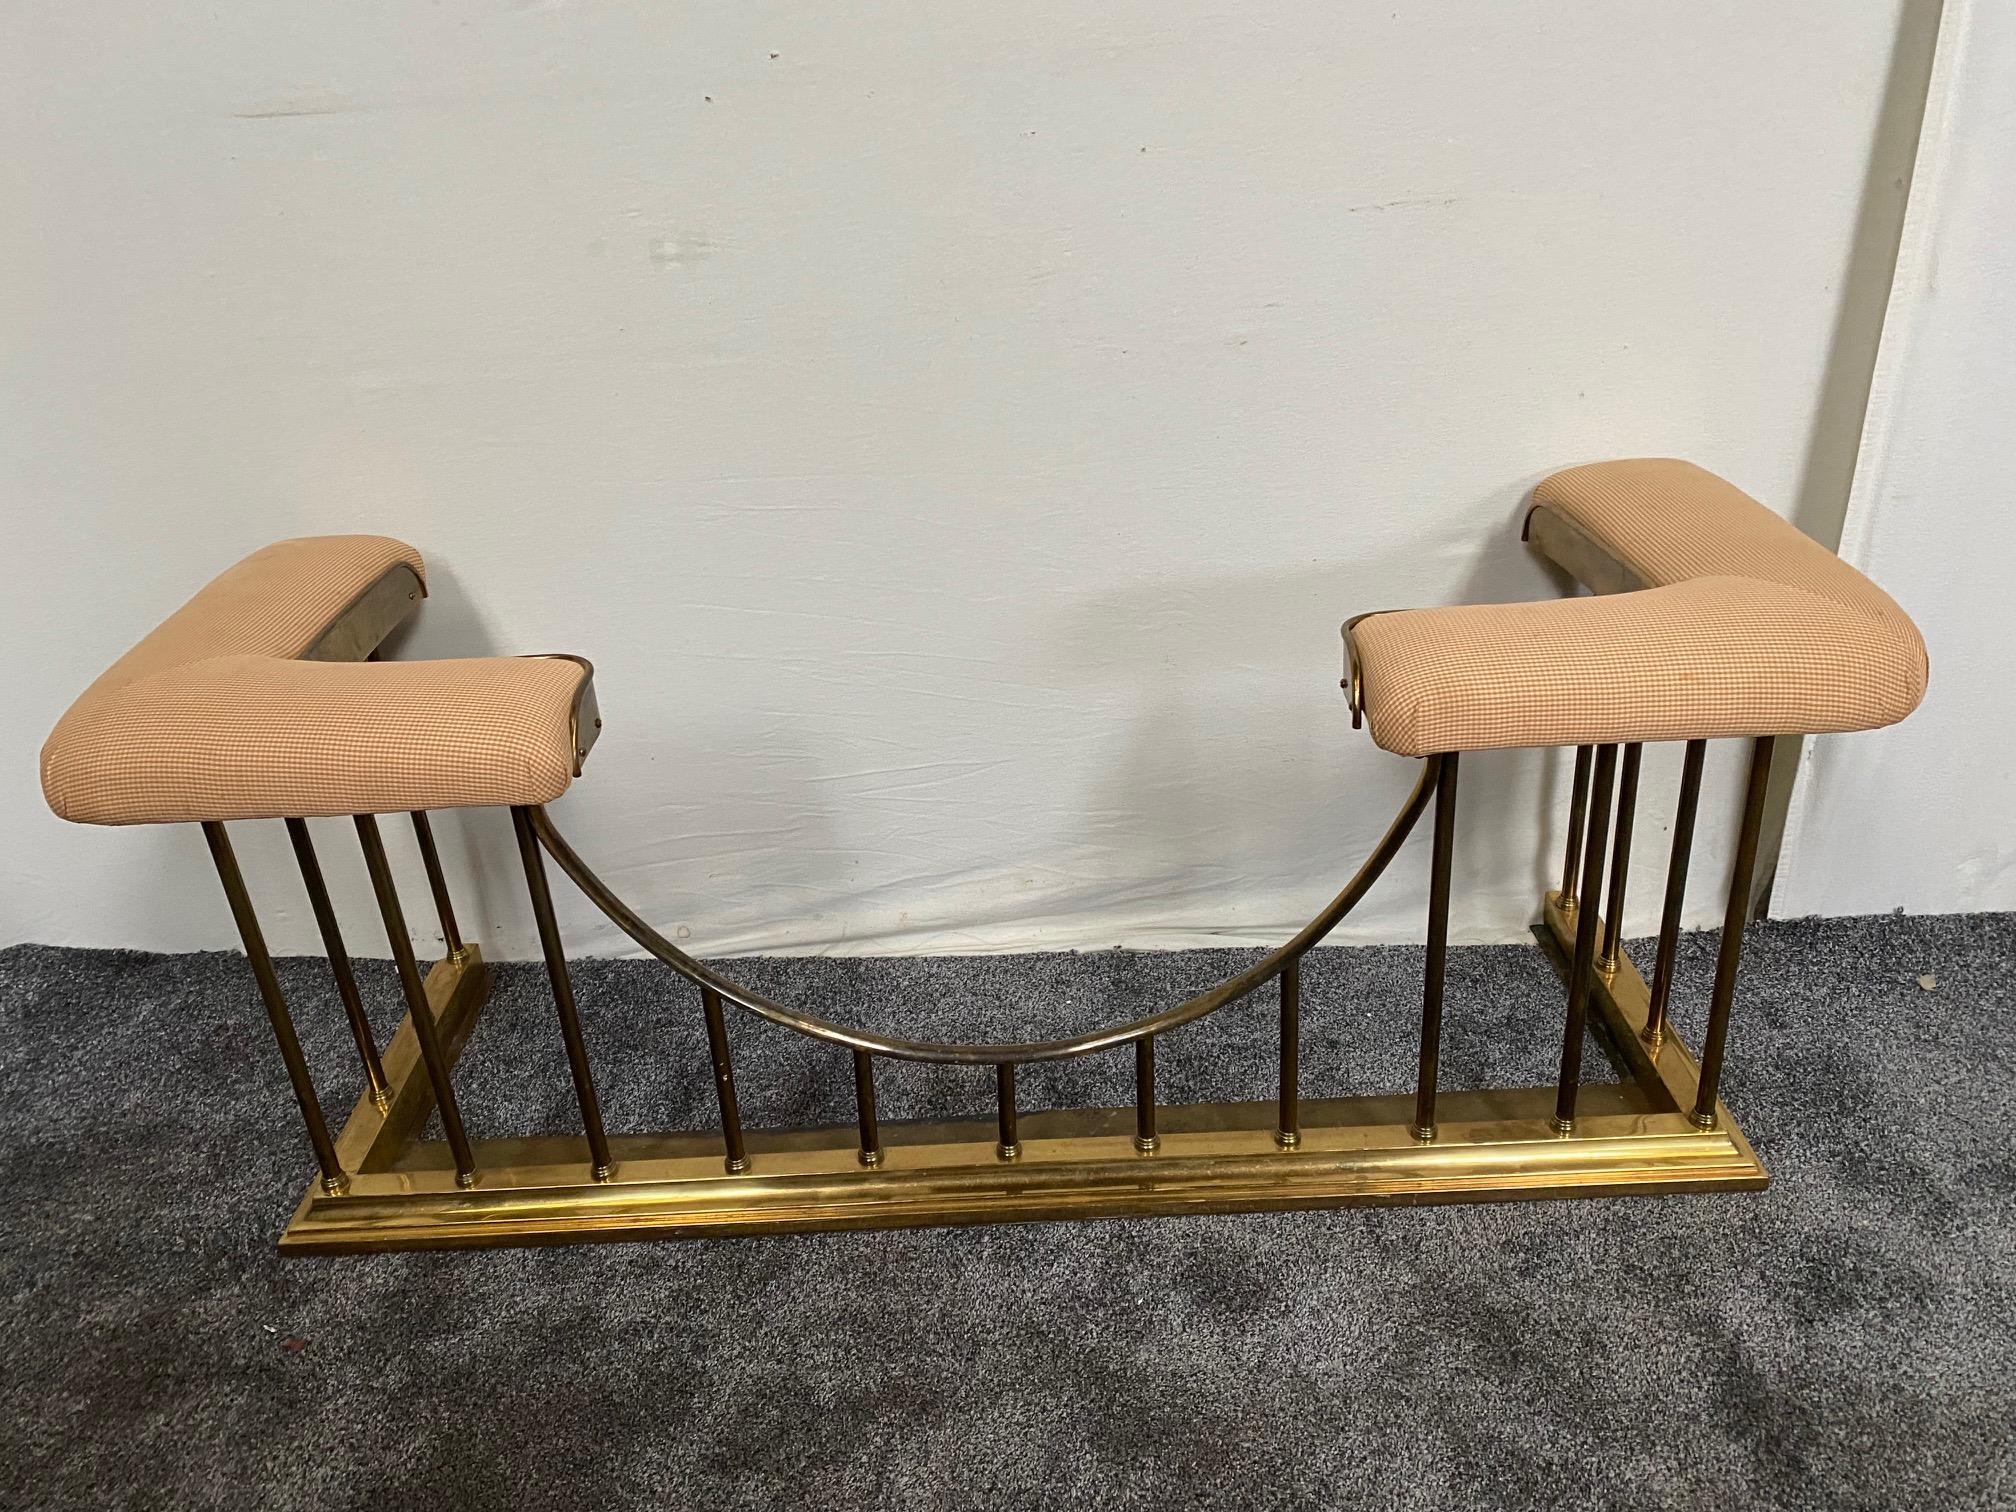 Brass club fender with upholstered seat. {56 cm H x 134 cm W x 44 cm D}.